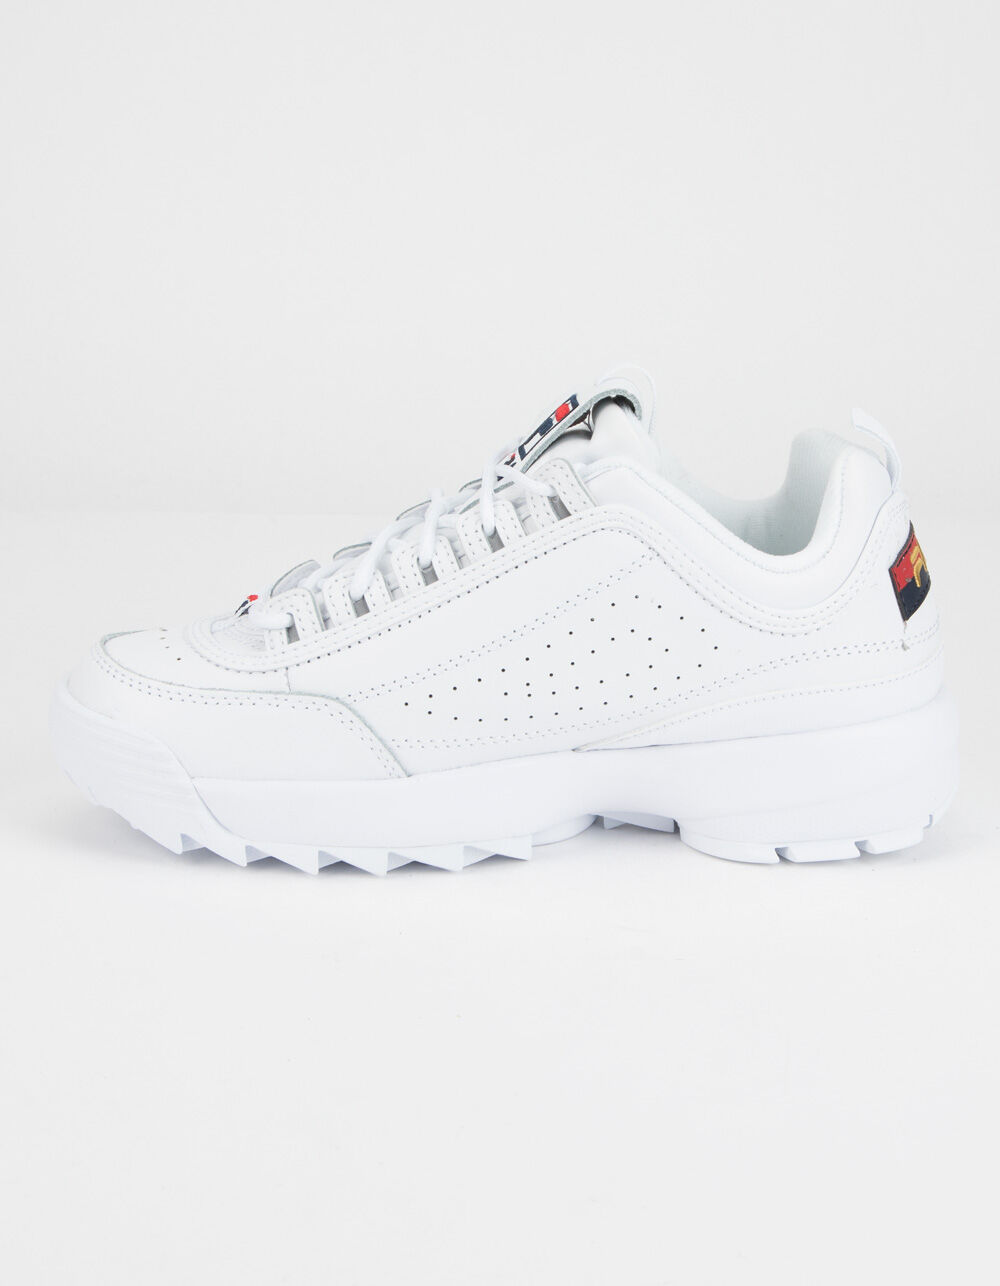 FILA Disruptor 2 Signature Womens Shoes - WHITE | Tillys